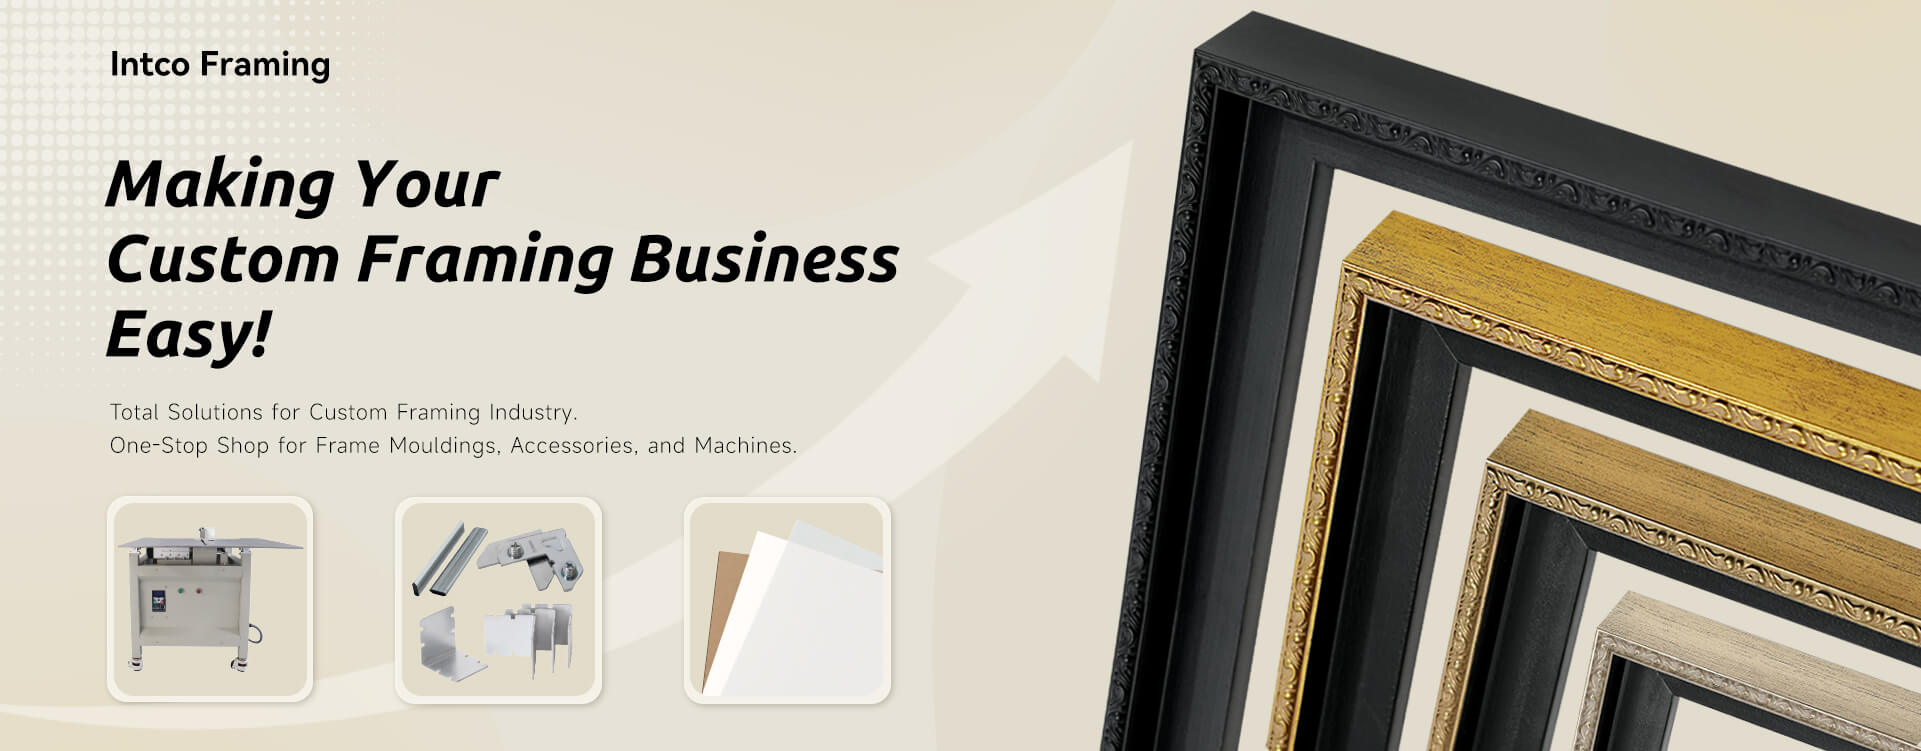 Total Solutions for Custom Framing Industry.One-Stop Shop for Frame Mouldings, Accessories, and Machines.